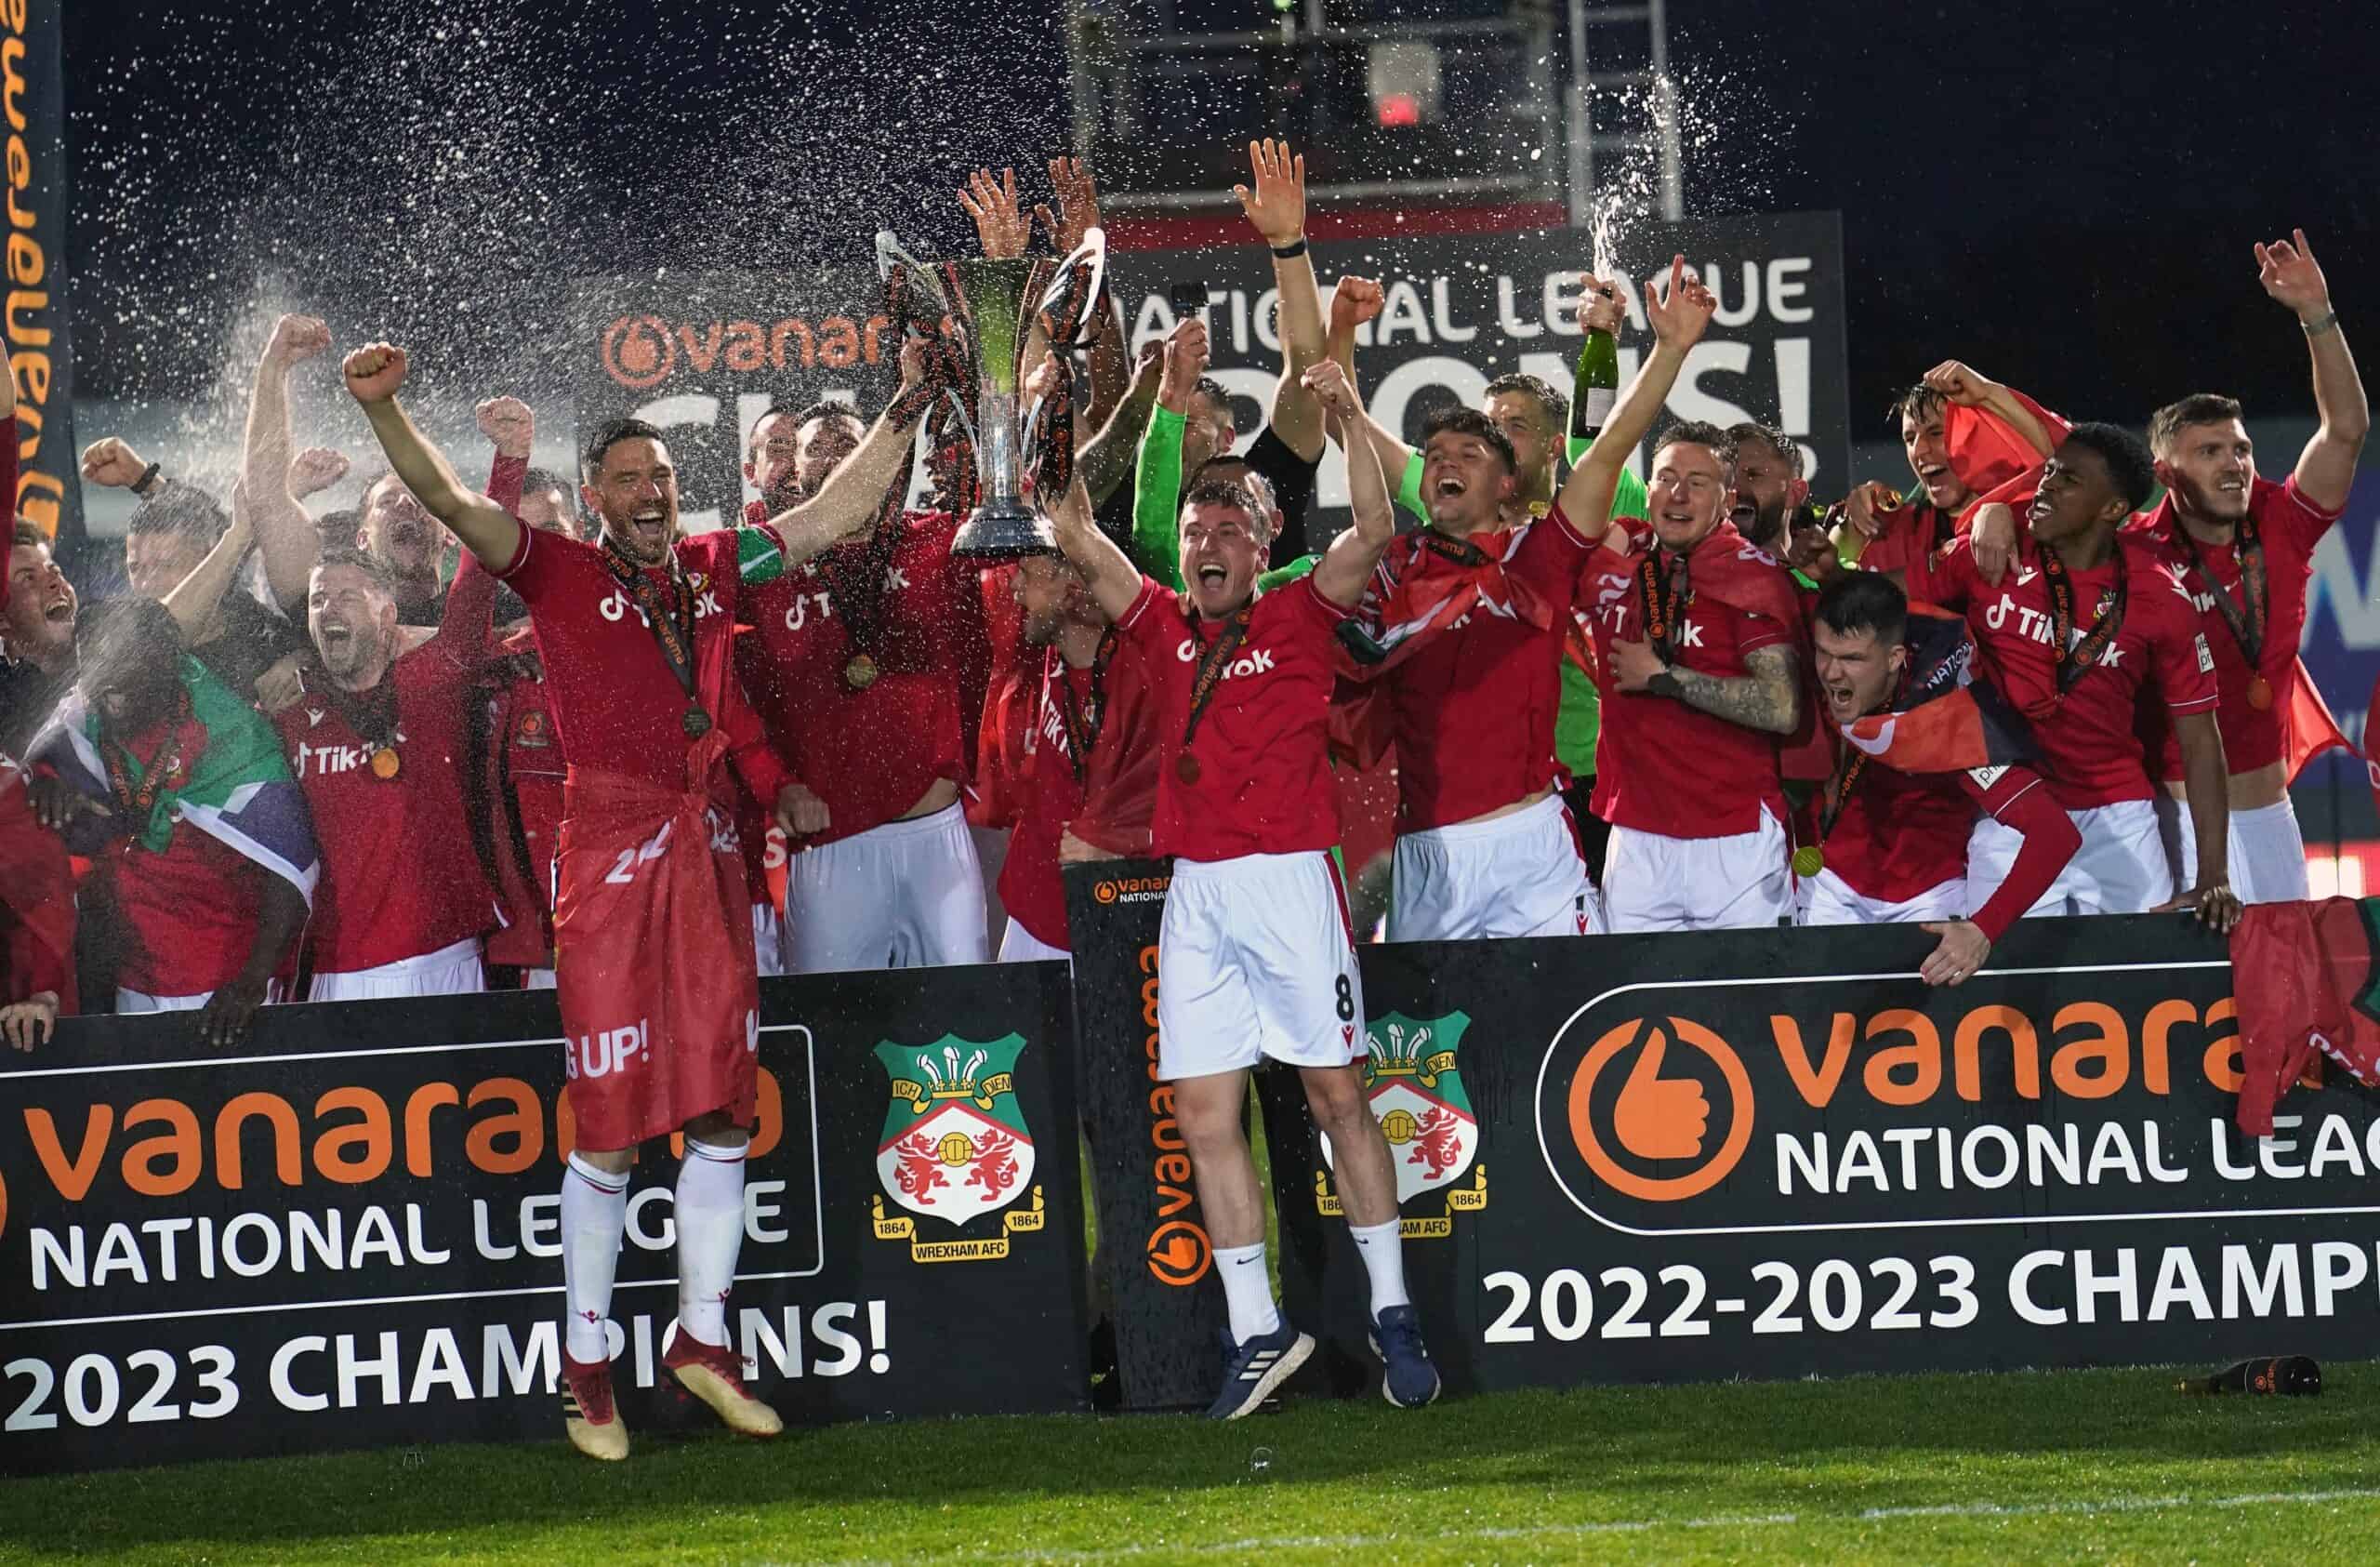 Wrexham players sing ‘f*** the Tories’ after winning National League title